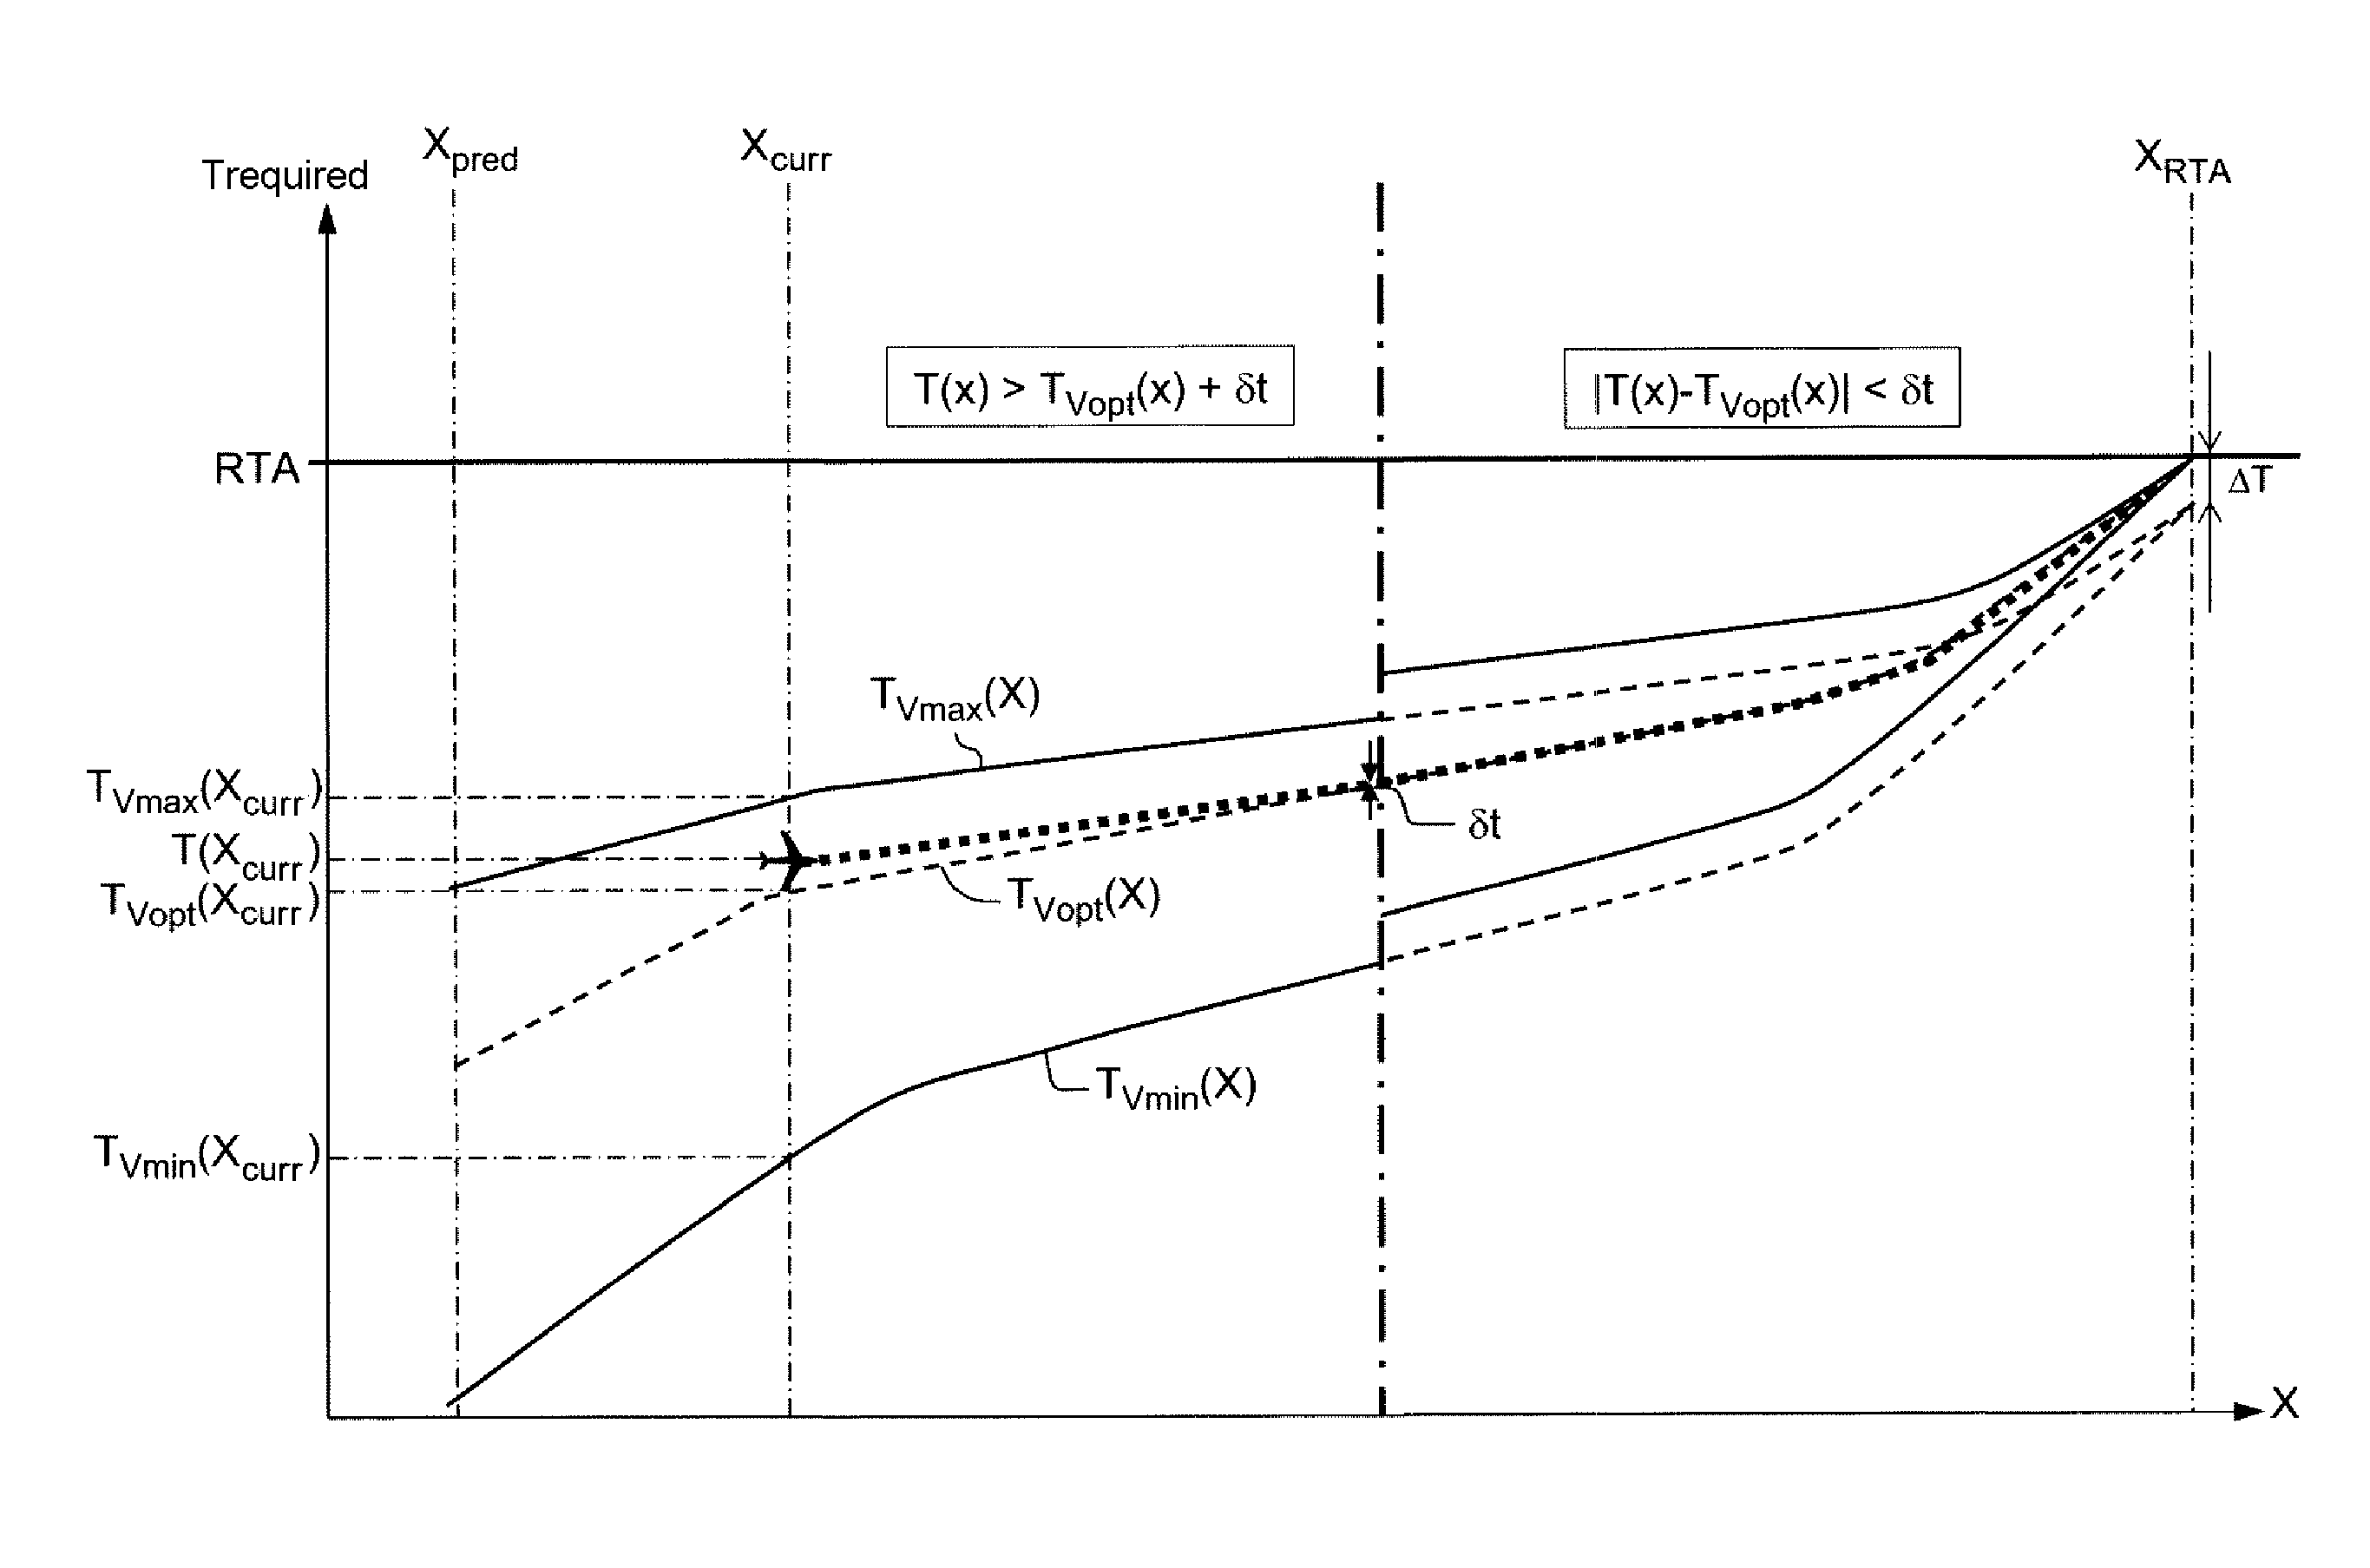 Method for continuously and adaptively generating a speed setpoint for an aircraft to observe an RTA